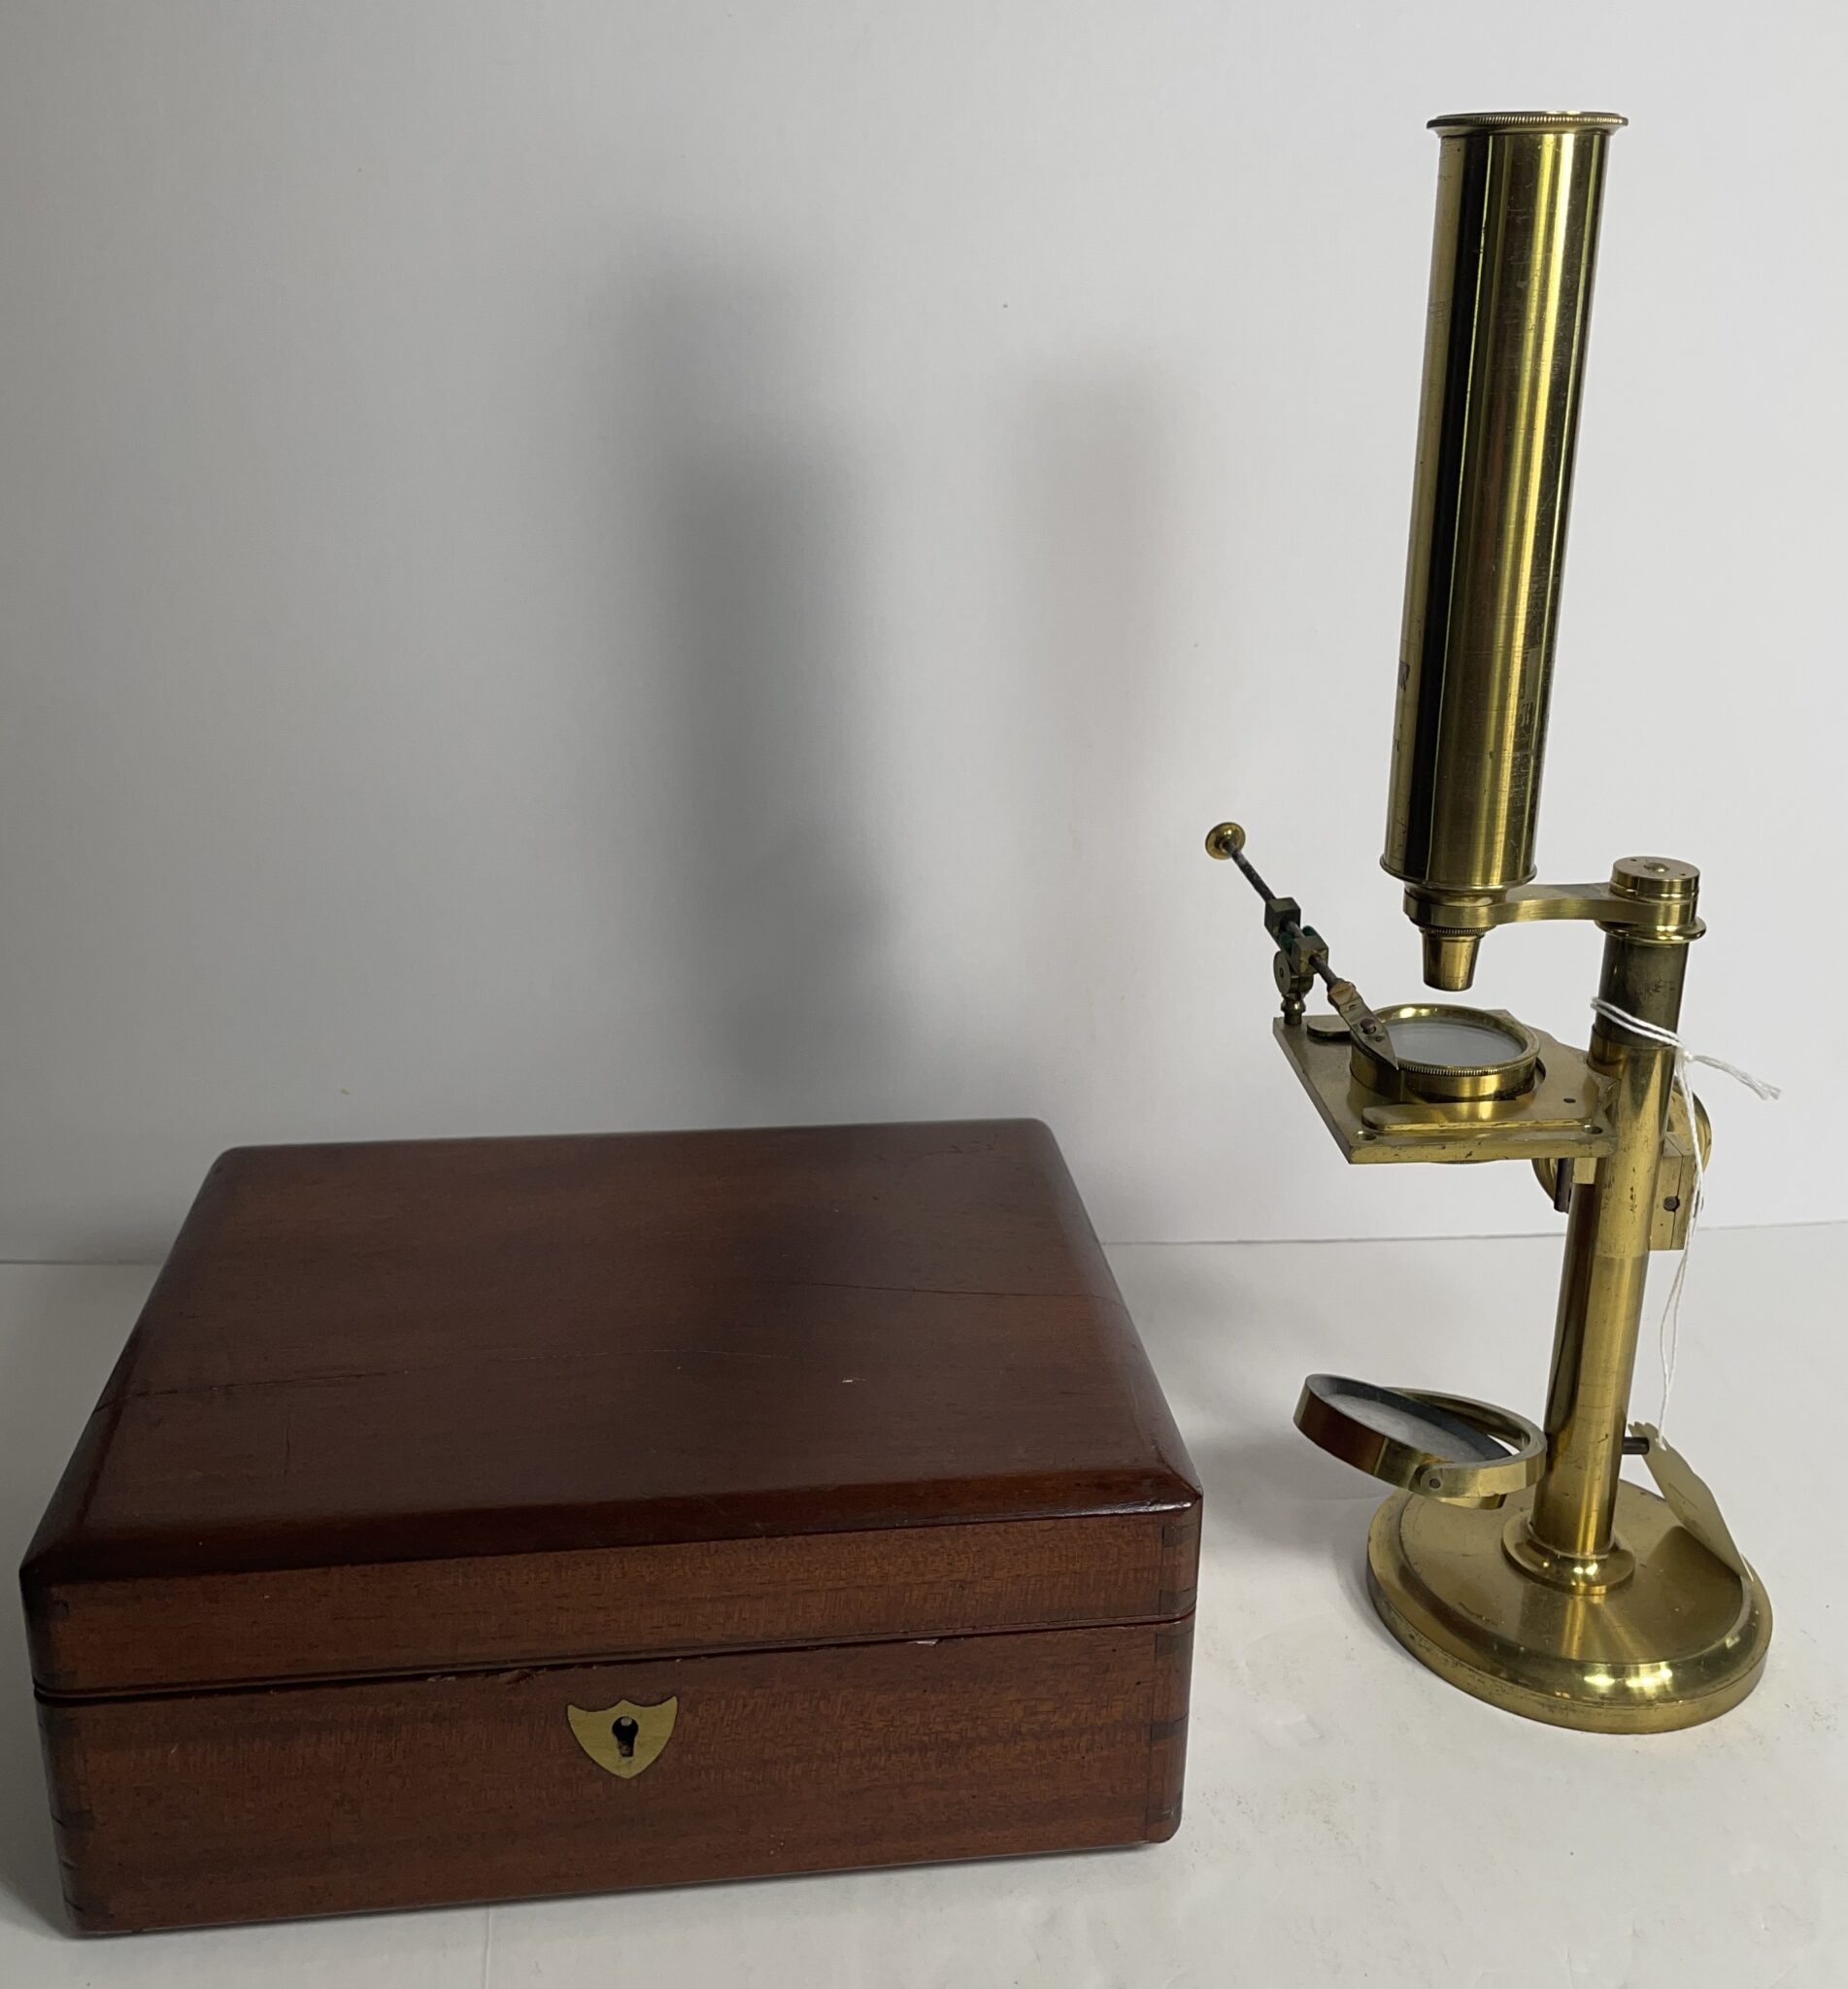 Signed Robert Brettell Bate Microscope with case and accessories.